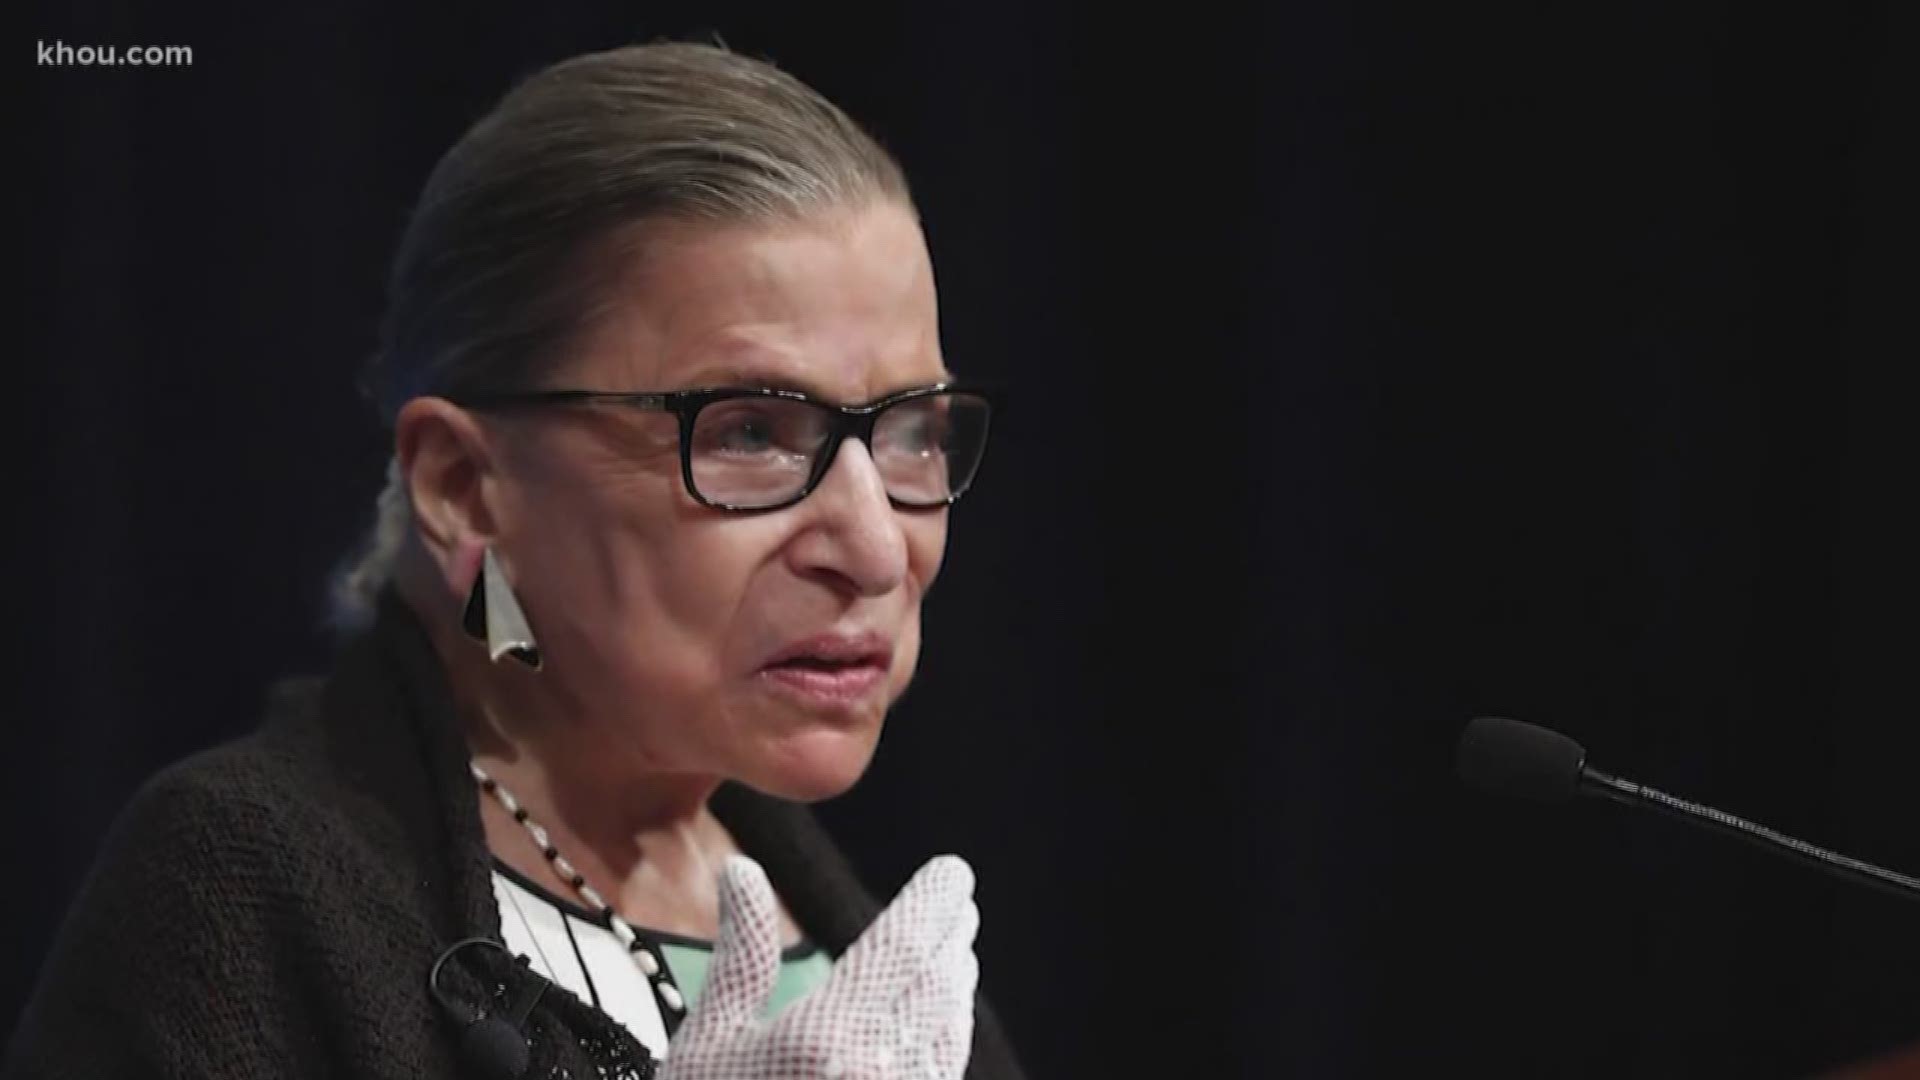 Despite her health concerns, Justice Ginsburg says she'll serve for as long as she can do the job. But a viewer wants to know if she can be removed from the bench if her health is in question?